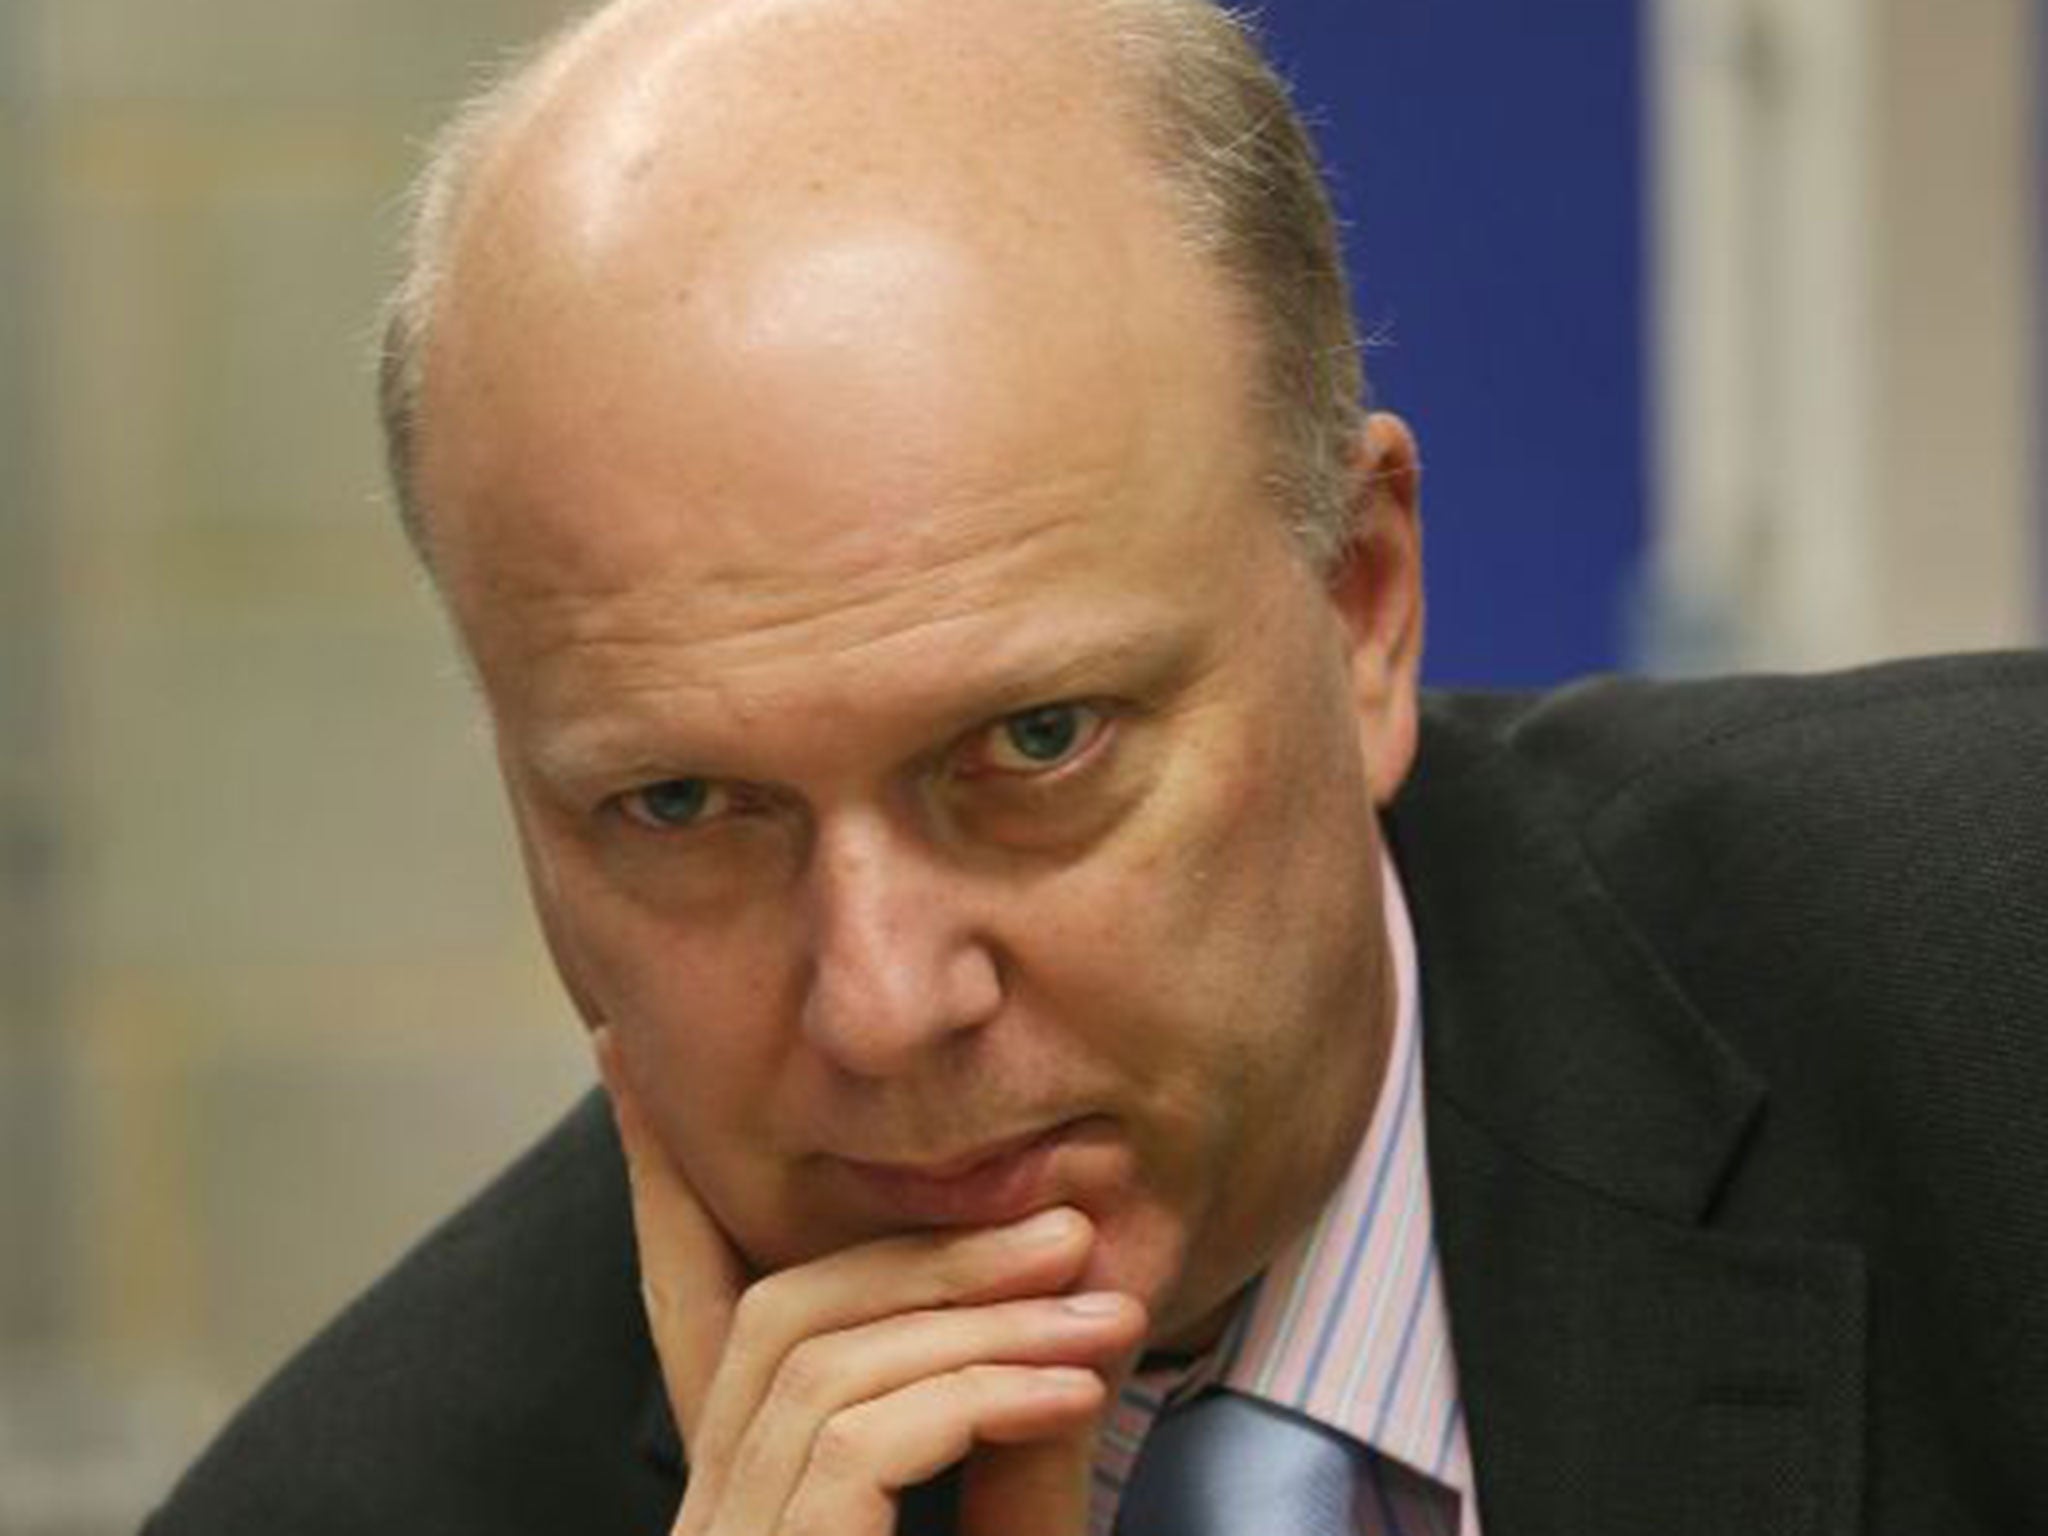 Filing a divorce petition under Chris Grayling’s plan would have cost £750